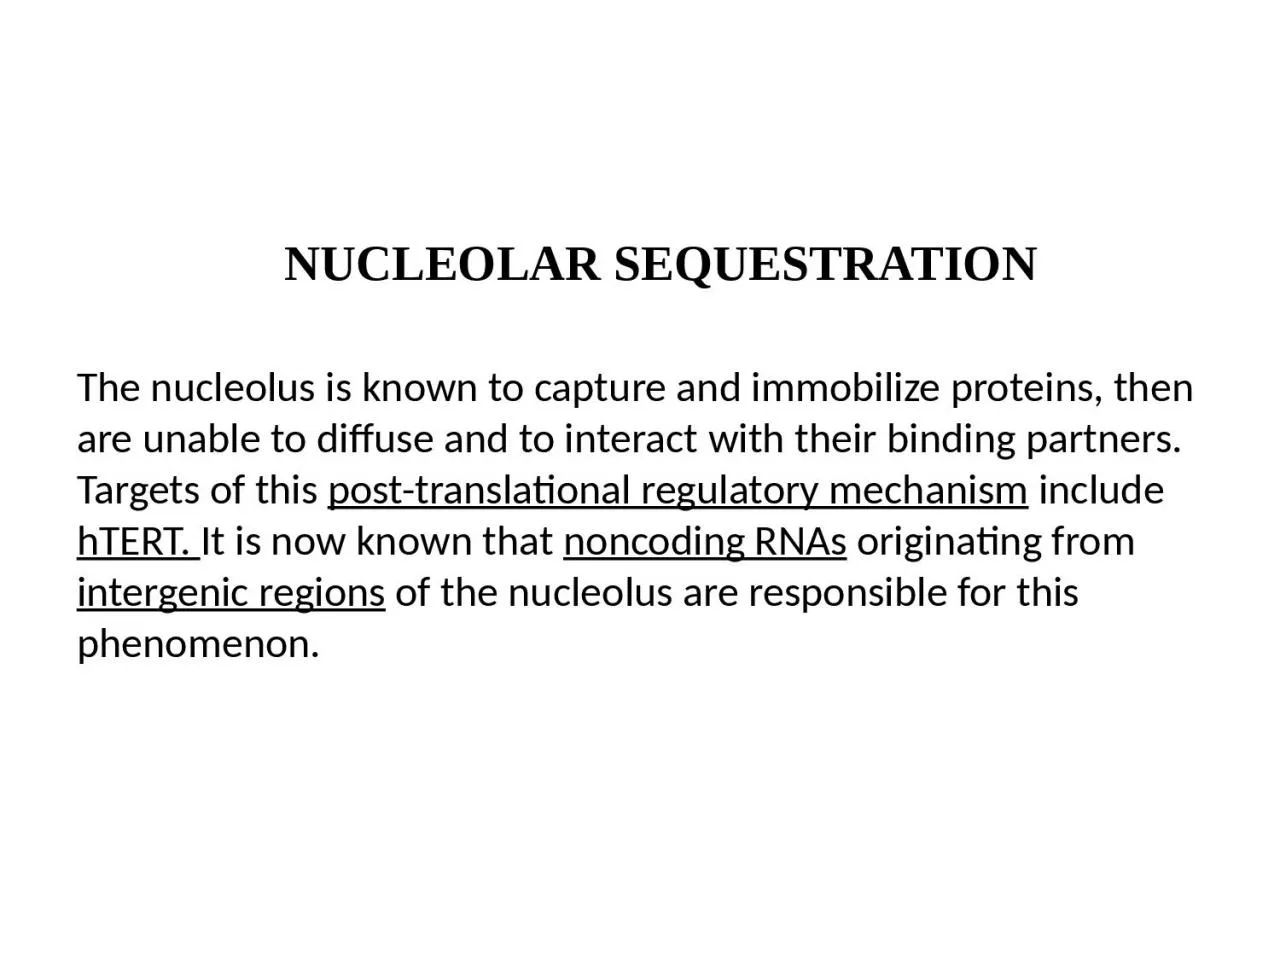 The nucleolus is known to capture and immobilize proteins, then are unable to diffuse